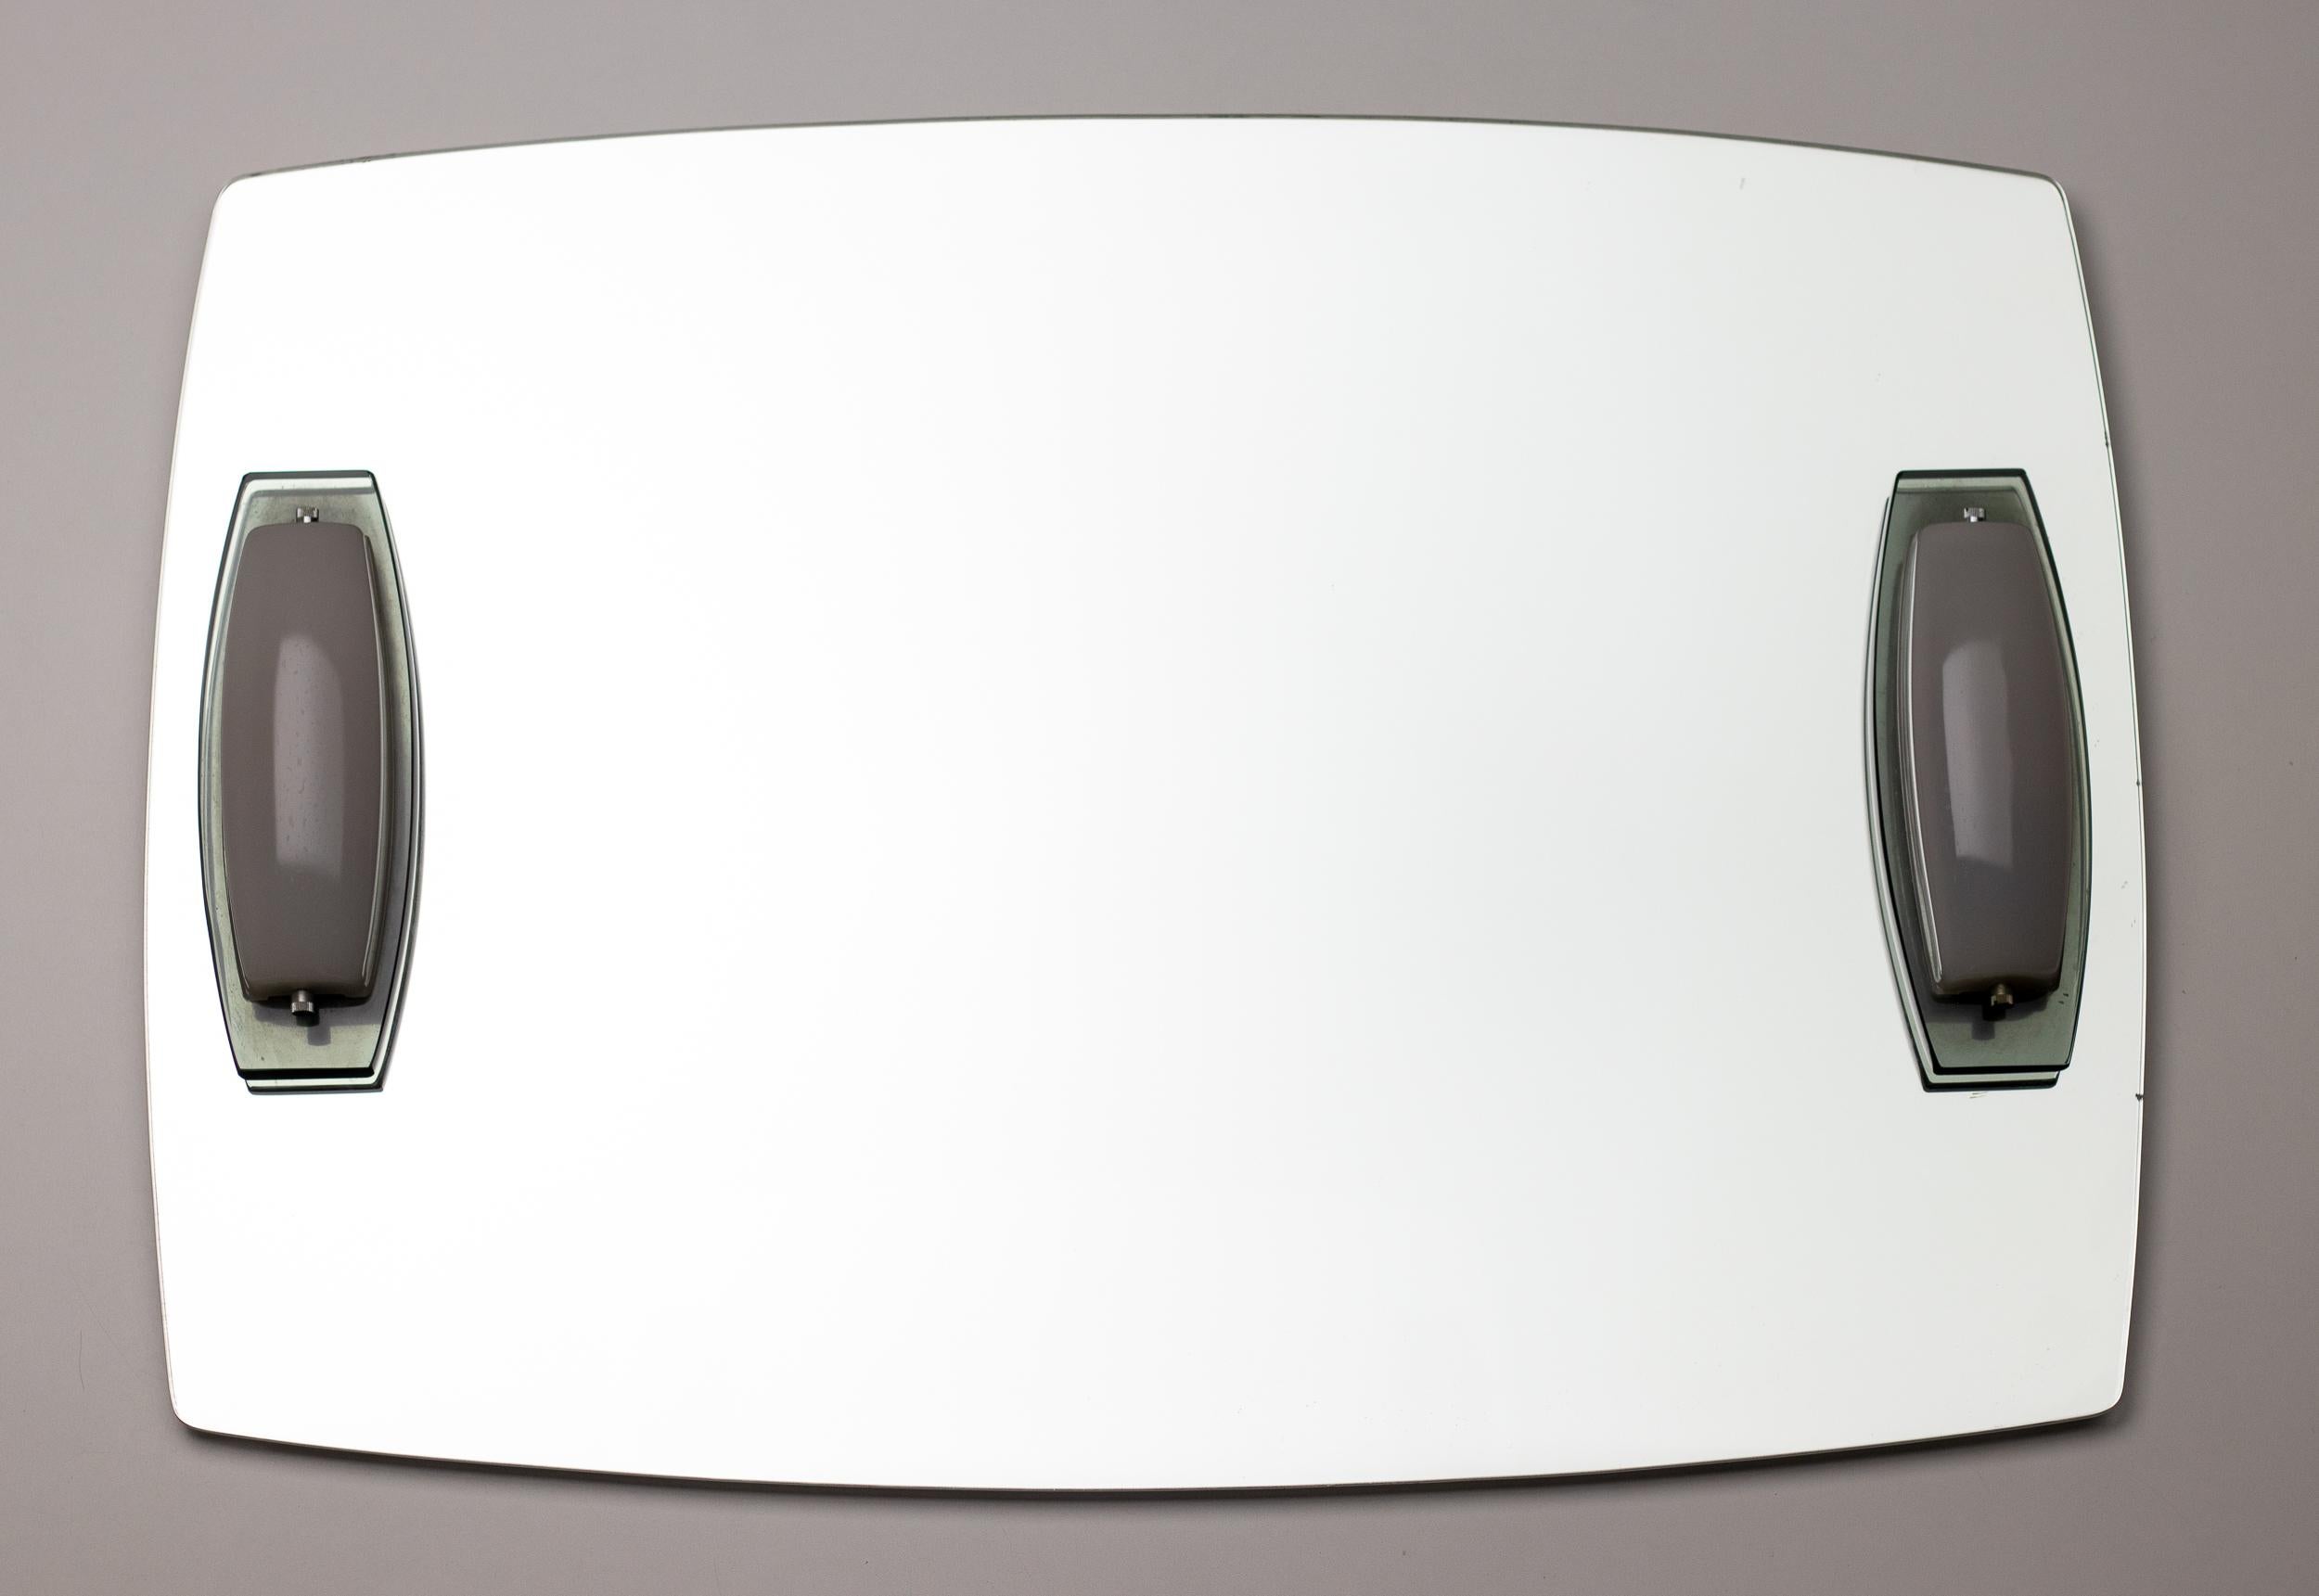 A stunning mirror with 2 integrated lights by Max Ingrand for Fontana Arte.
The lights are designed with a typical Max Ingrand beveled emerald green base and a white colored glass shade. They are fitted with standard E14 sockets suitable for